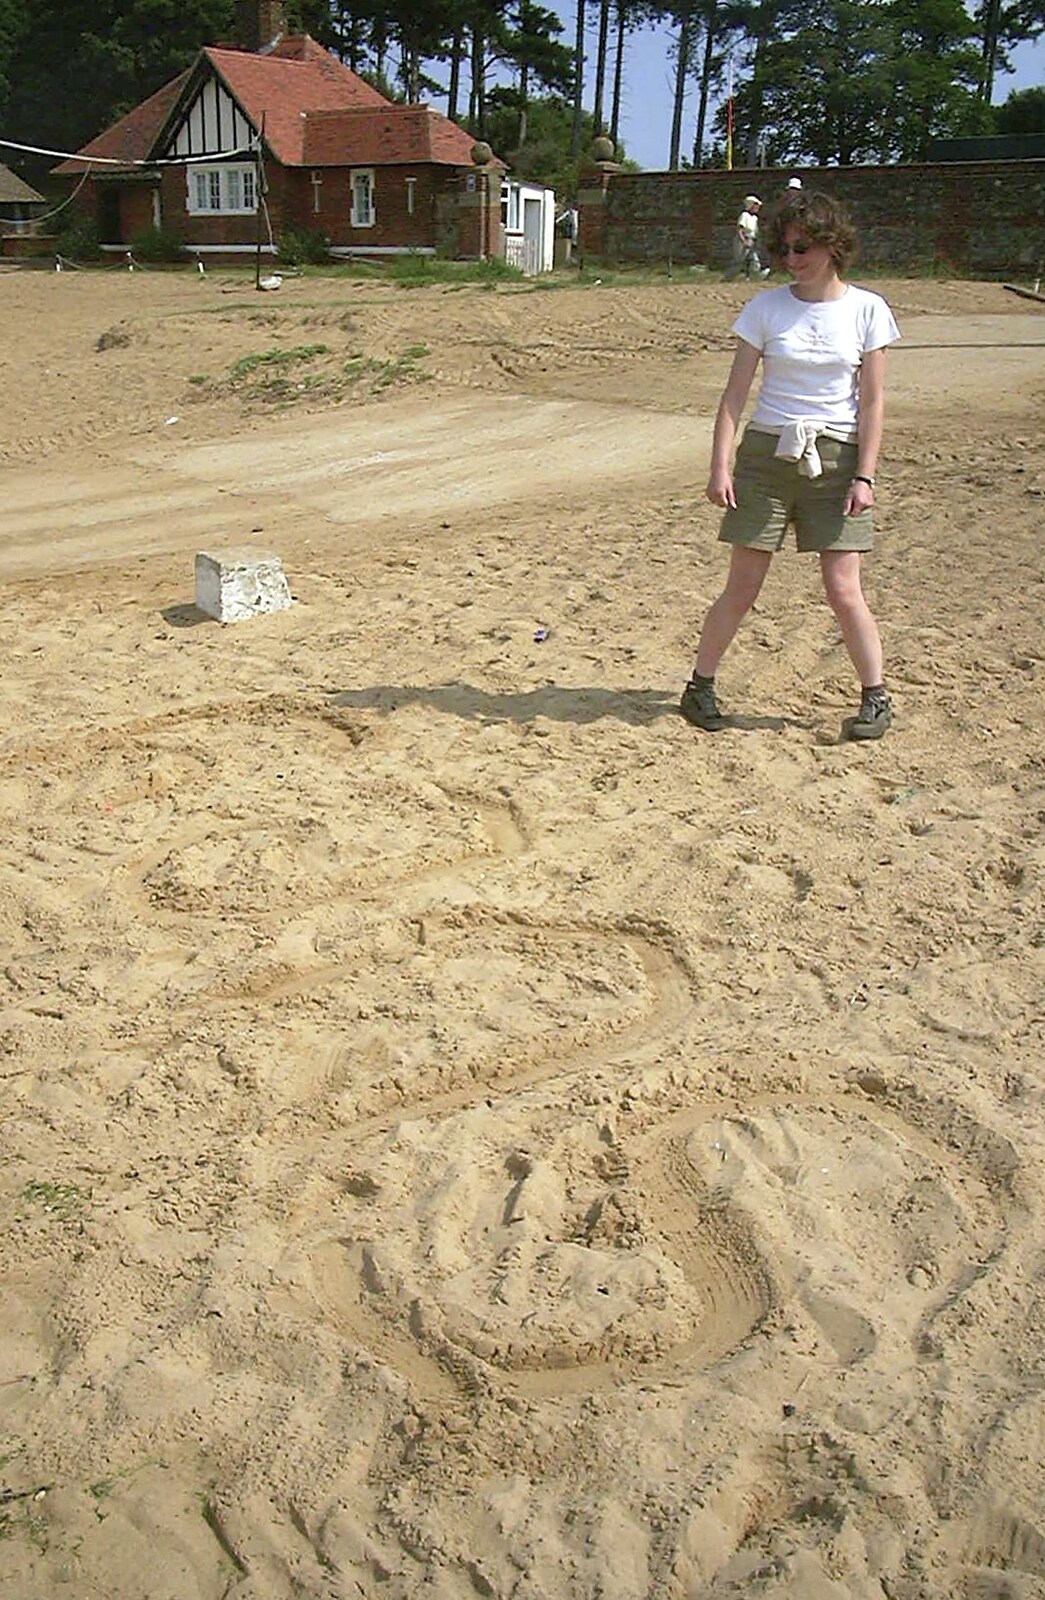 A BSCC Splinter Group Camping Trip, Shottisham, Suffolk - 13th August 2004: Suey writes her name in the sand